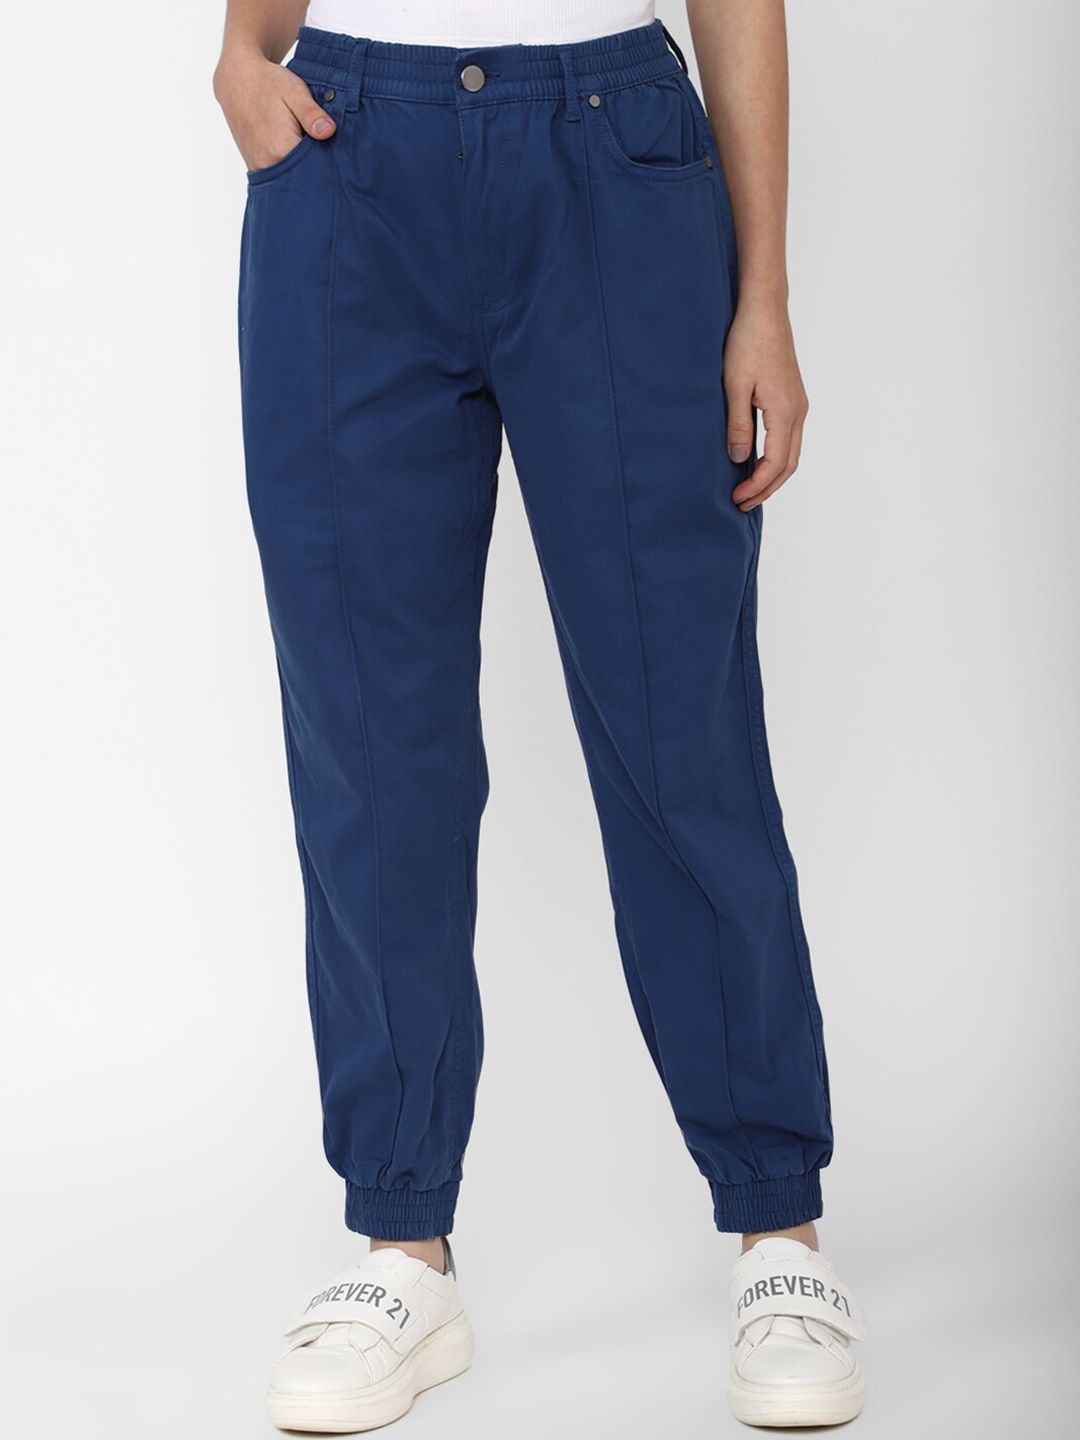 FOREVER 21 Women Blue Joggers Trousers Price in India